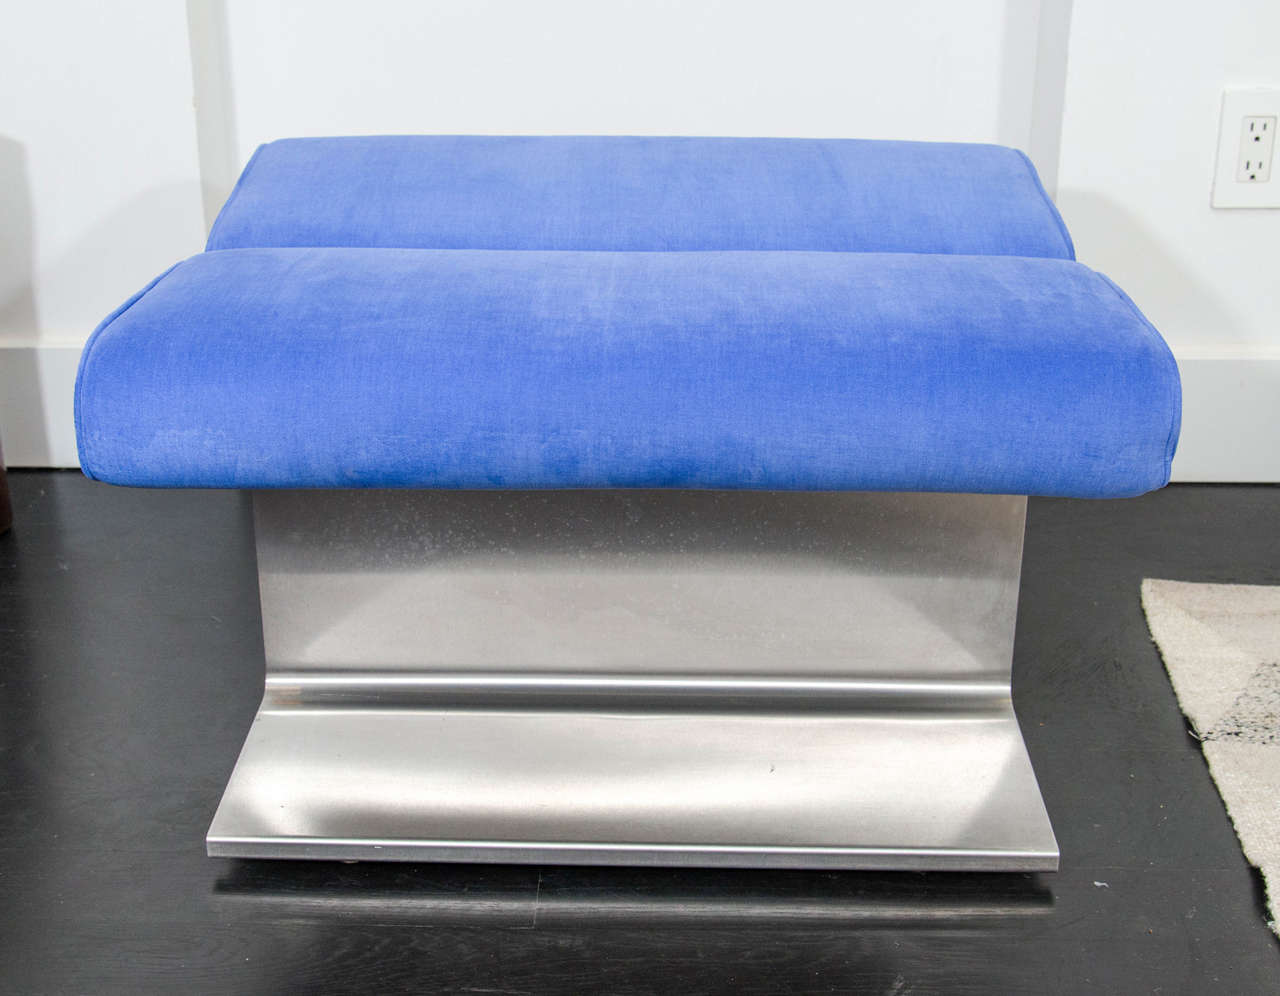 Sculptural stainless steel bench with blue upholstery. Exceptional
construction. Open to custom upholstery with COM.